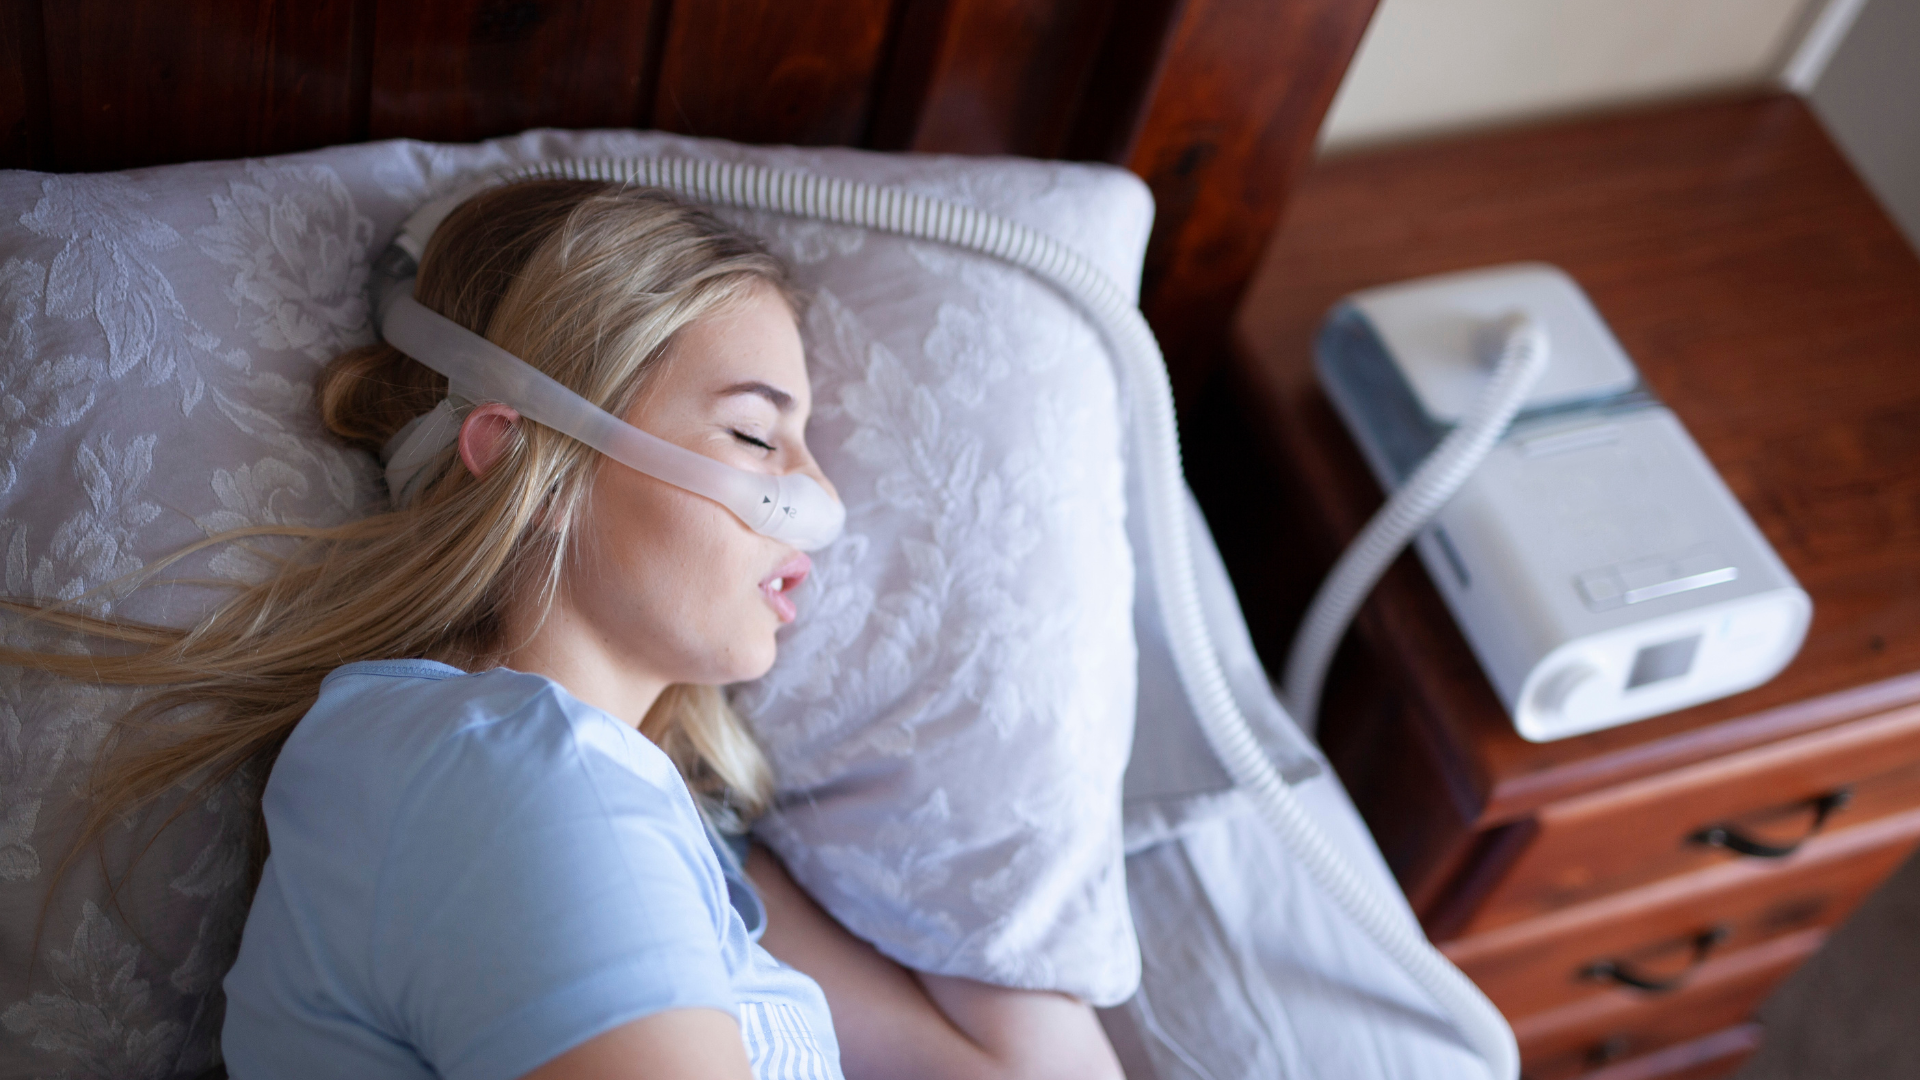 woman sleeping with CPAP machine to prevent sleep apnea which can cause heart problems in some people.